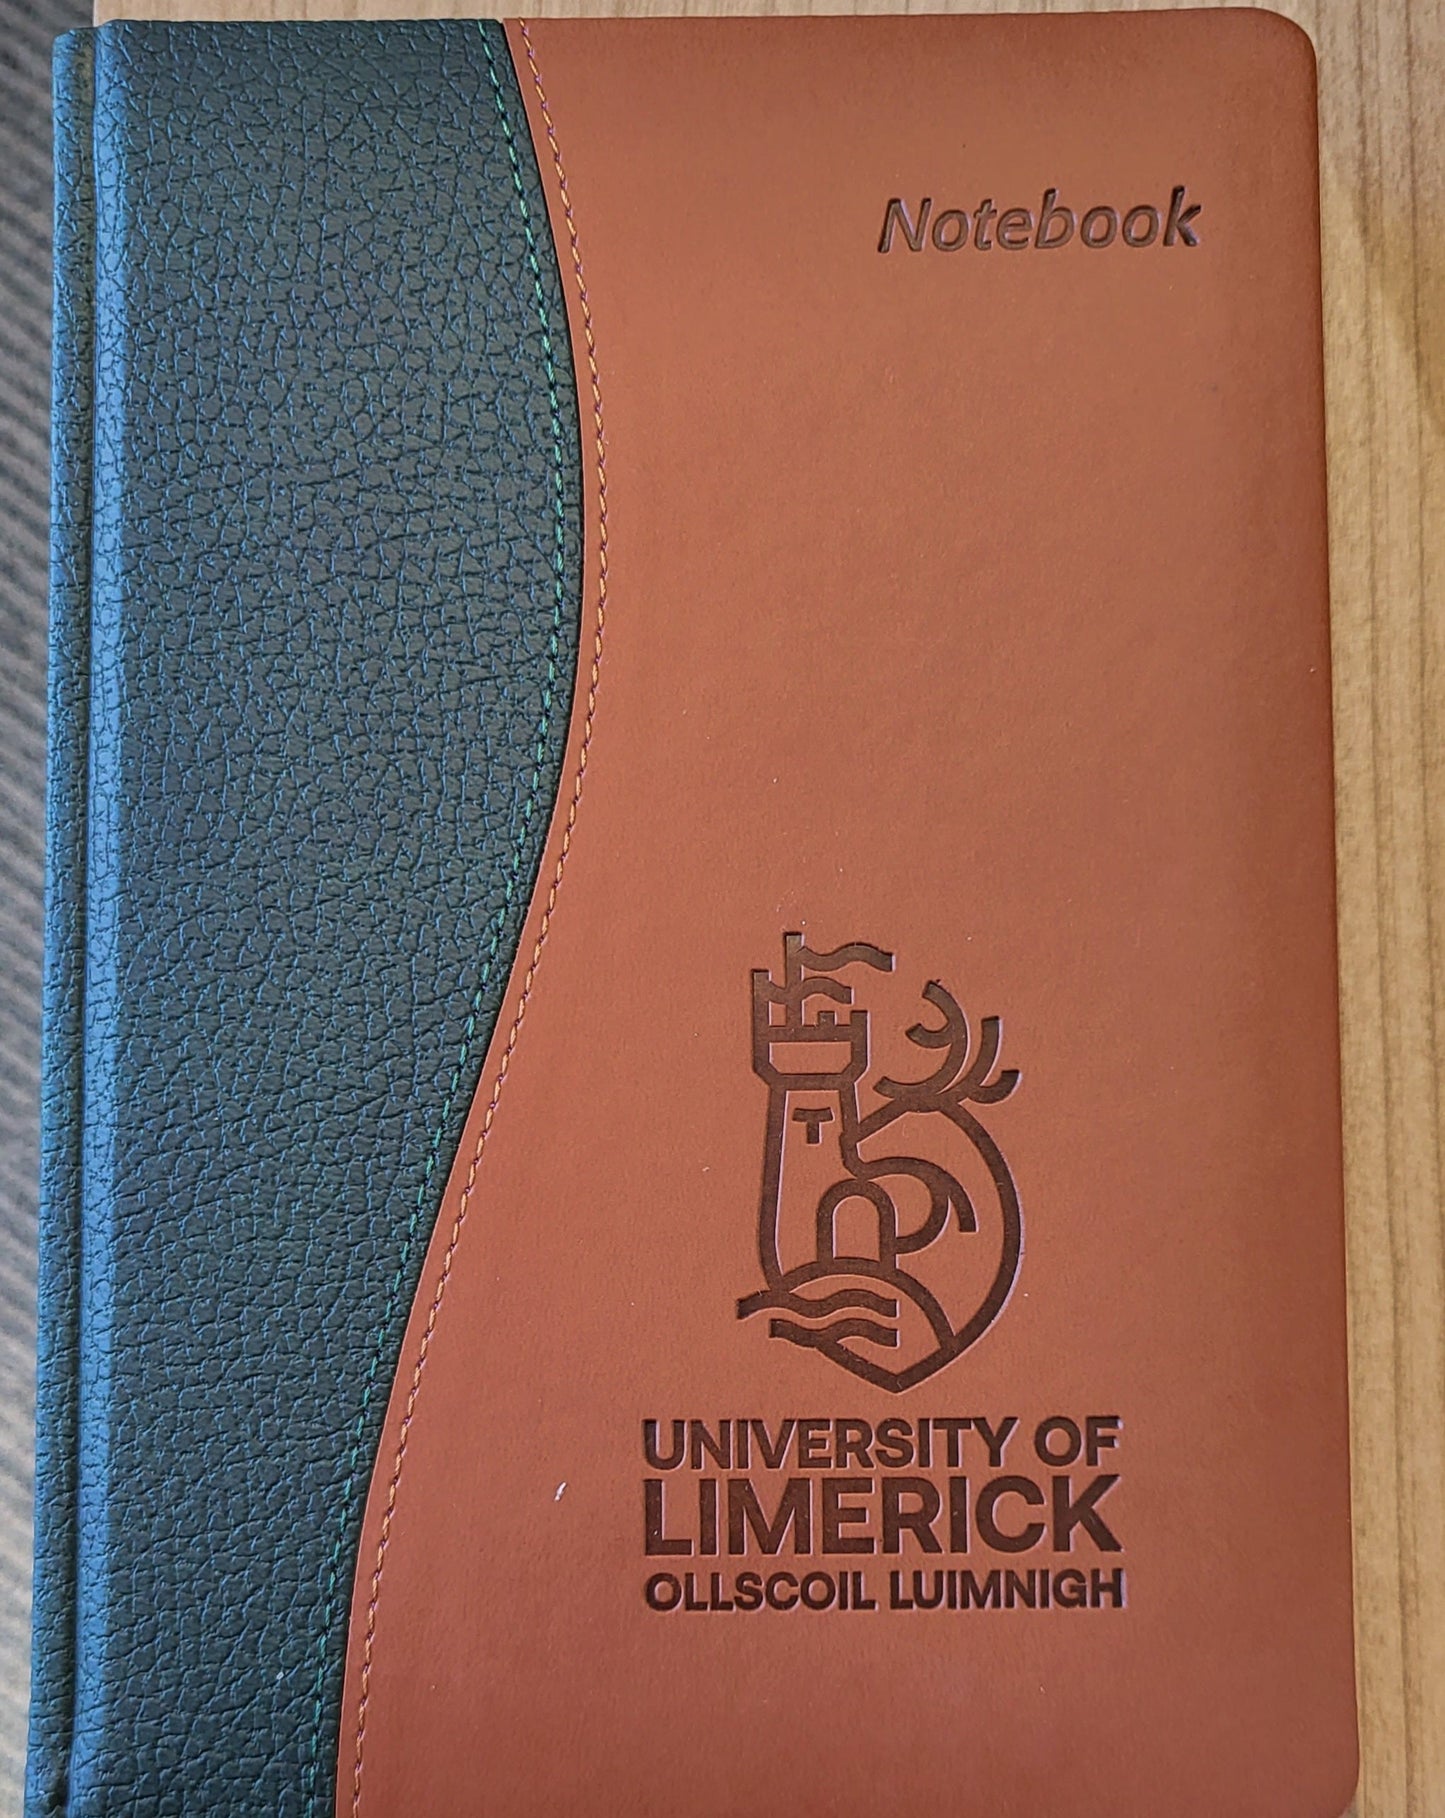 Notebook, Dual Tone Leather in green and tan. UL logo debossed.